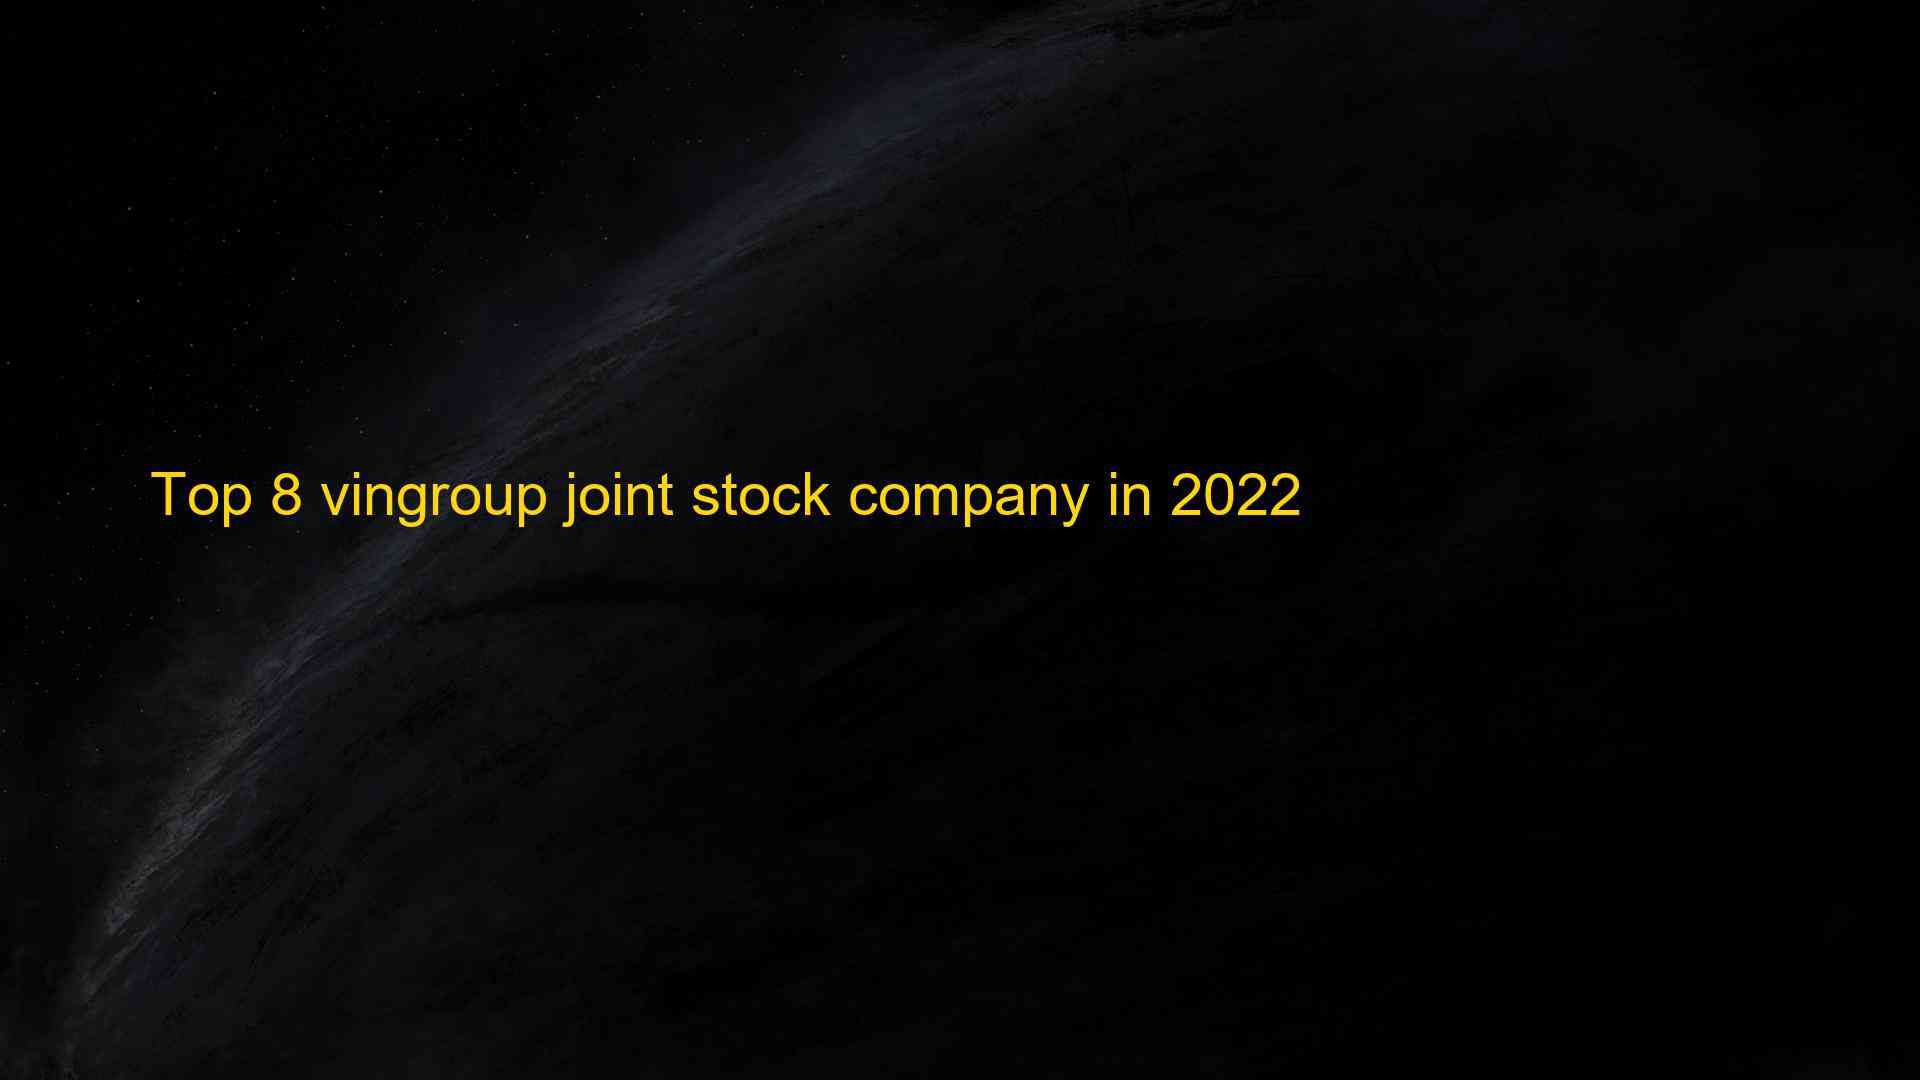 Top 8 vingroup joint stock company in 2022 1660016871